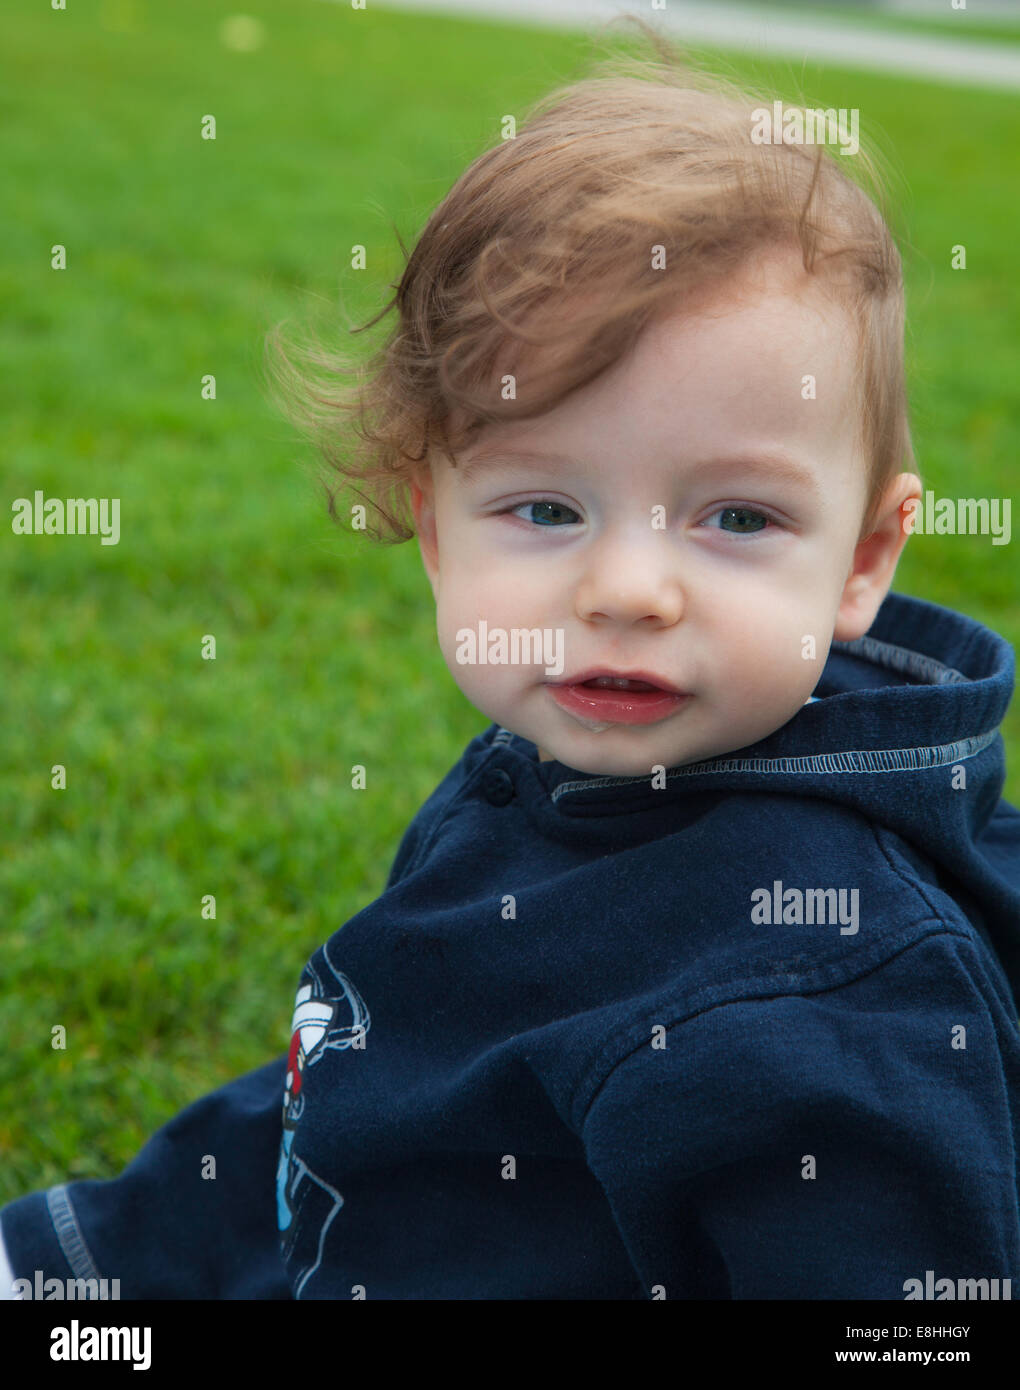 9 months old baby boy portrait outdoor in the park. Stock Photo